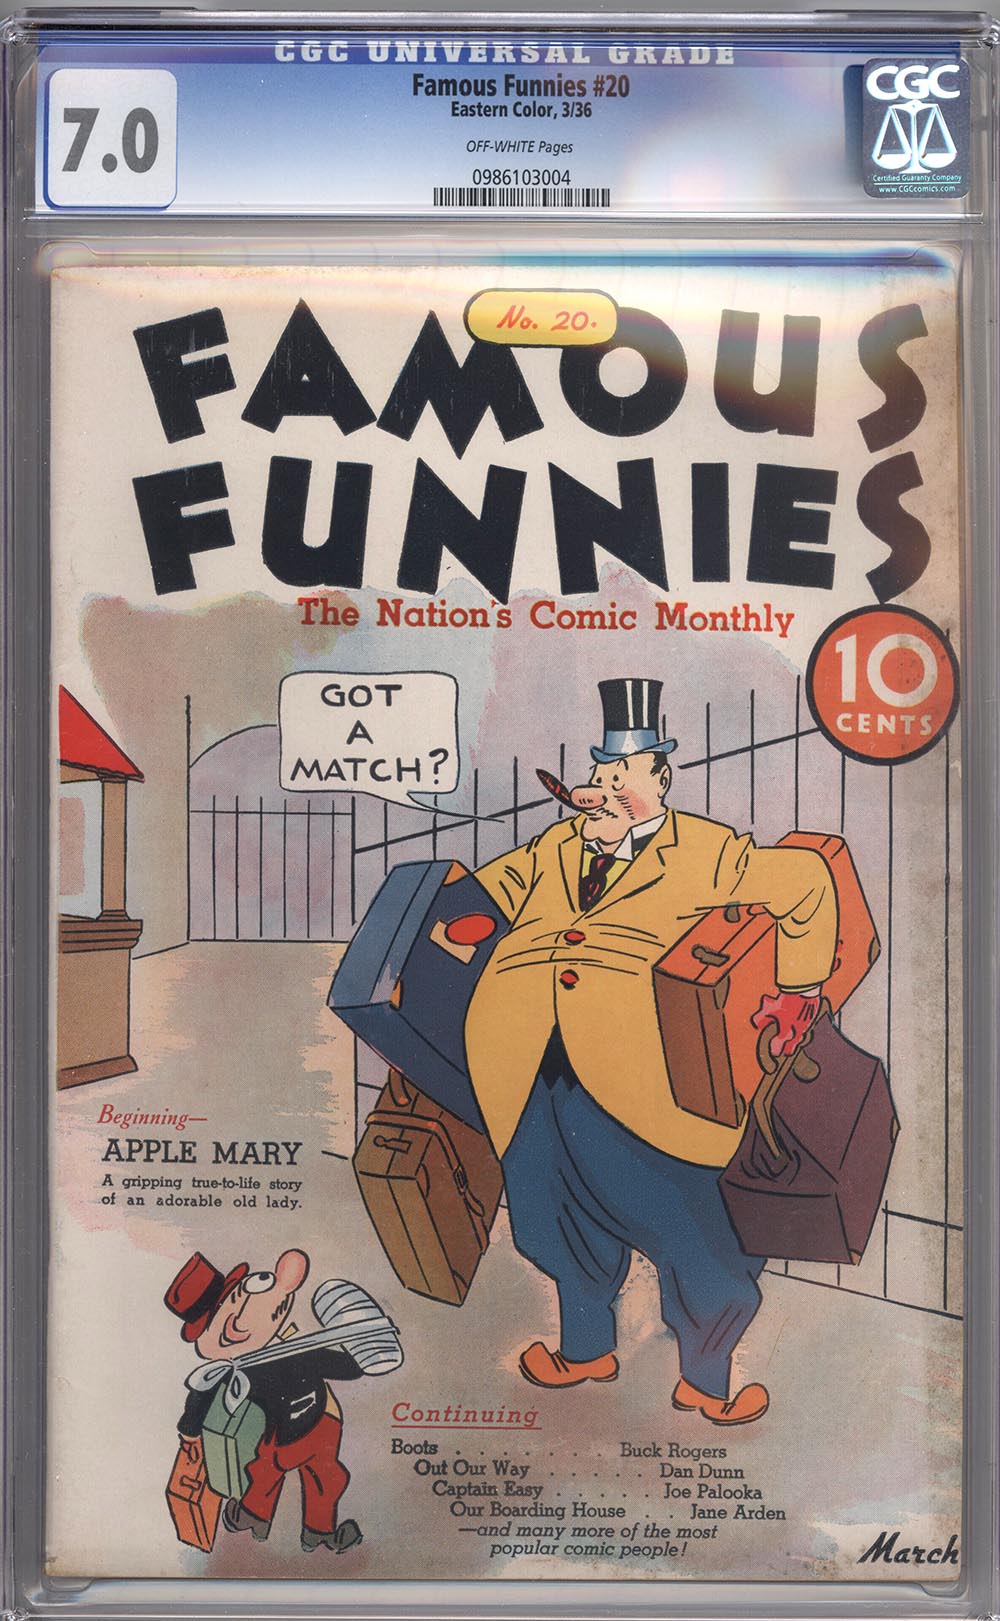 FAMOUS FUNNIES